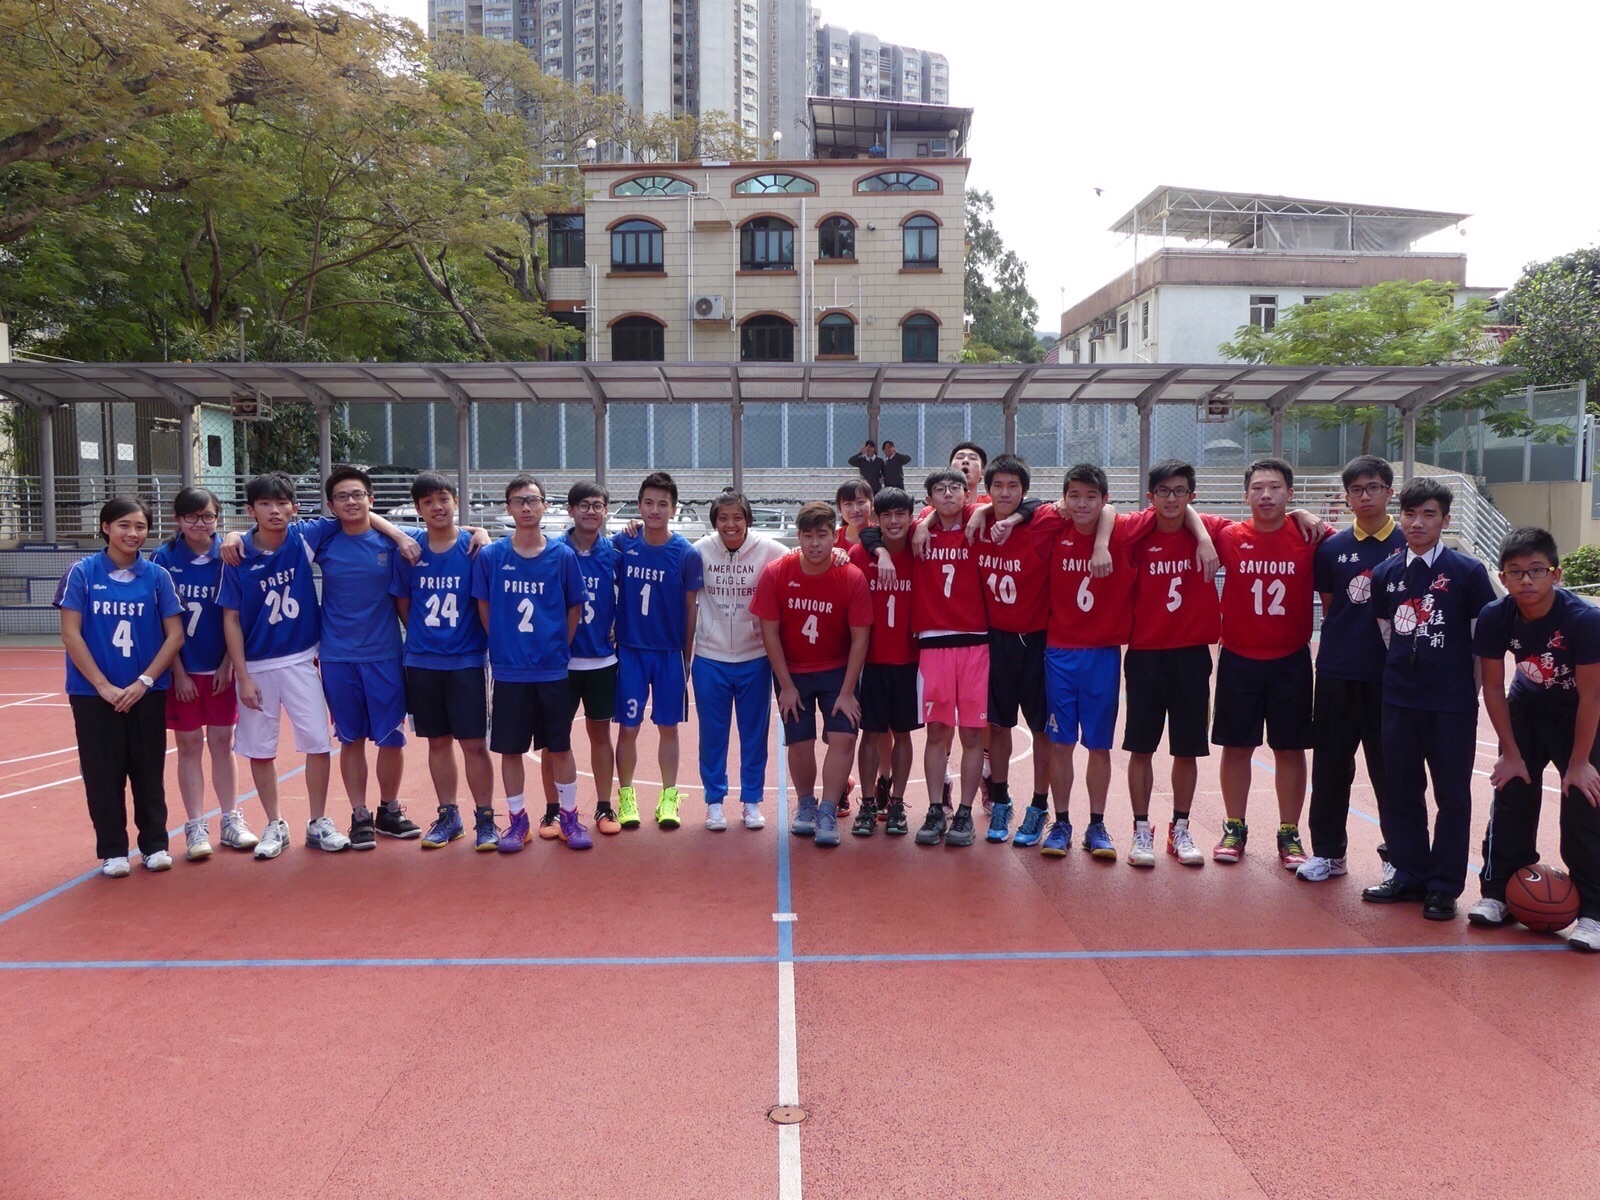 Sports Association – Inter-house Basketball Competitions